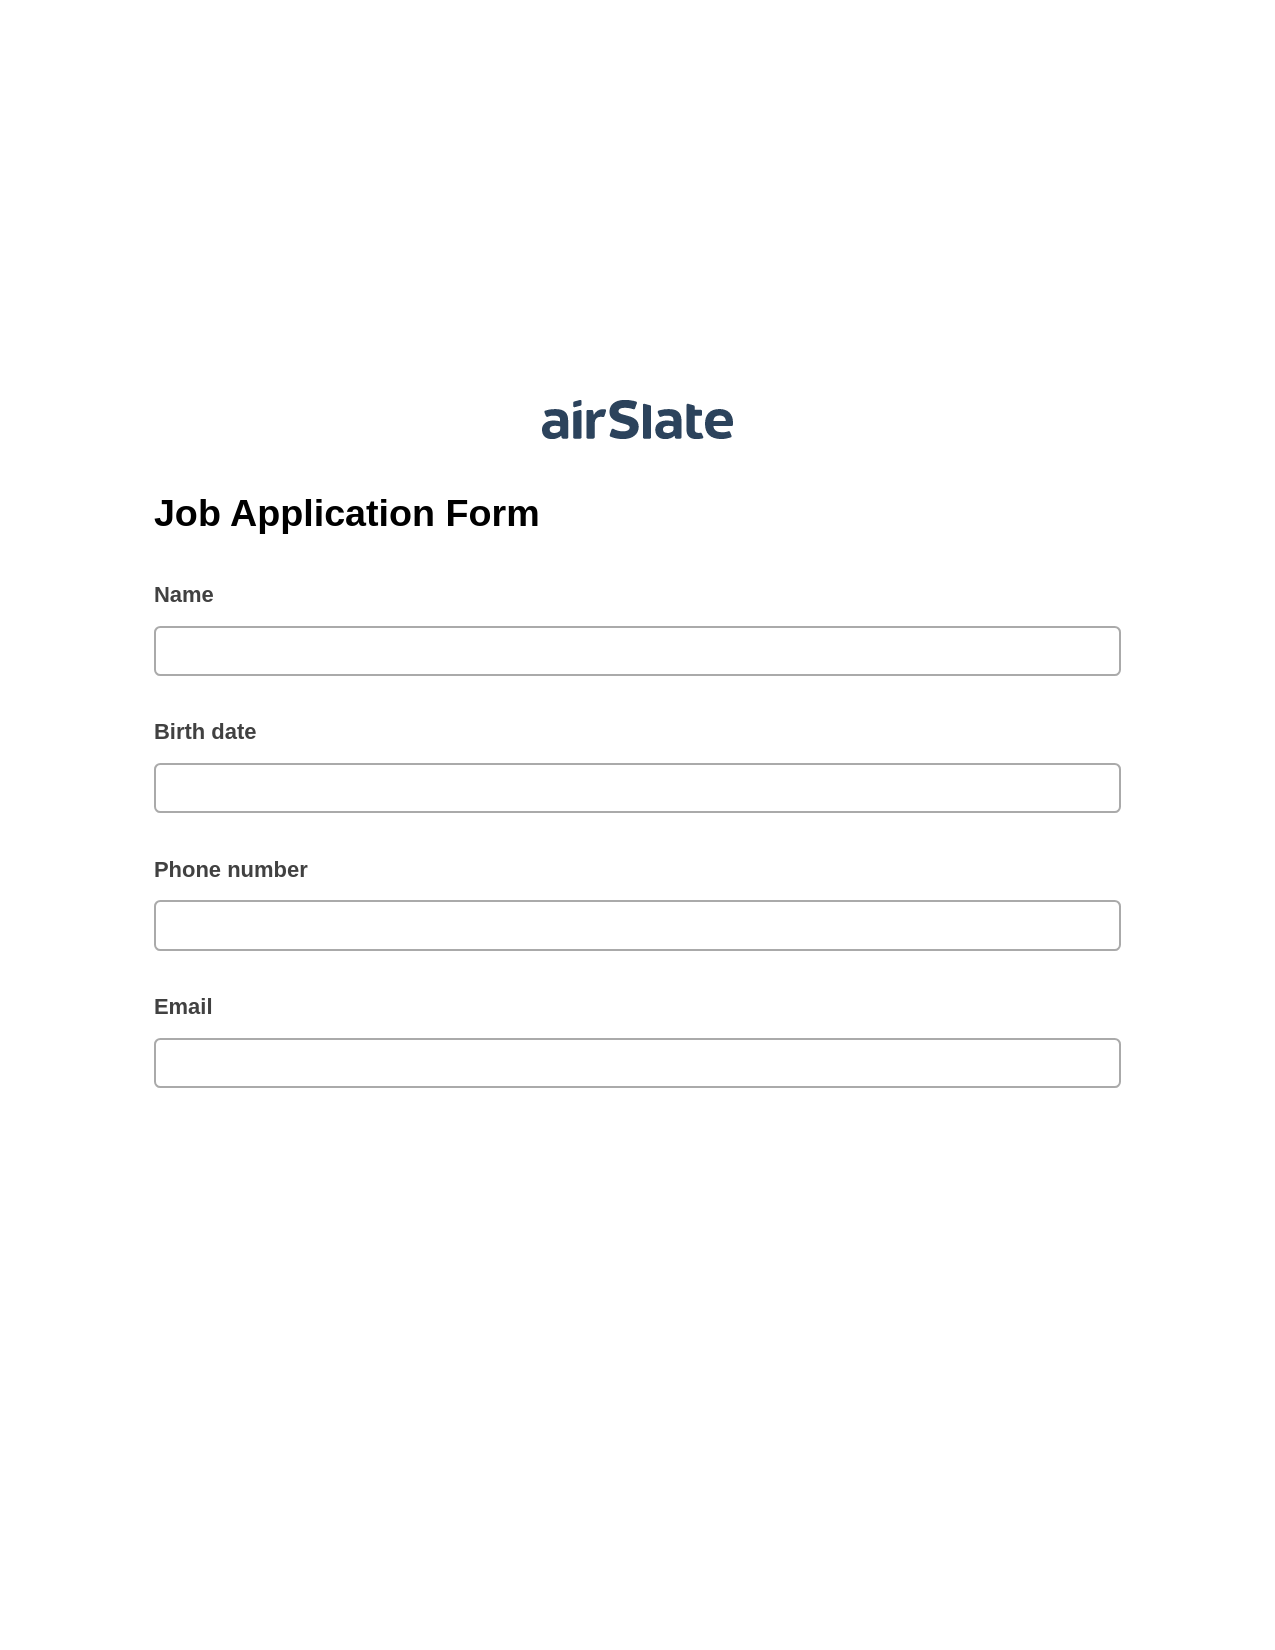 Job Application Form Pre-fill from Office 365 Excel Bot, Create slate addon, Export to Excel 365 Bot